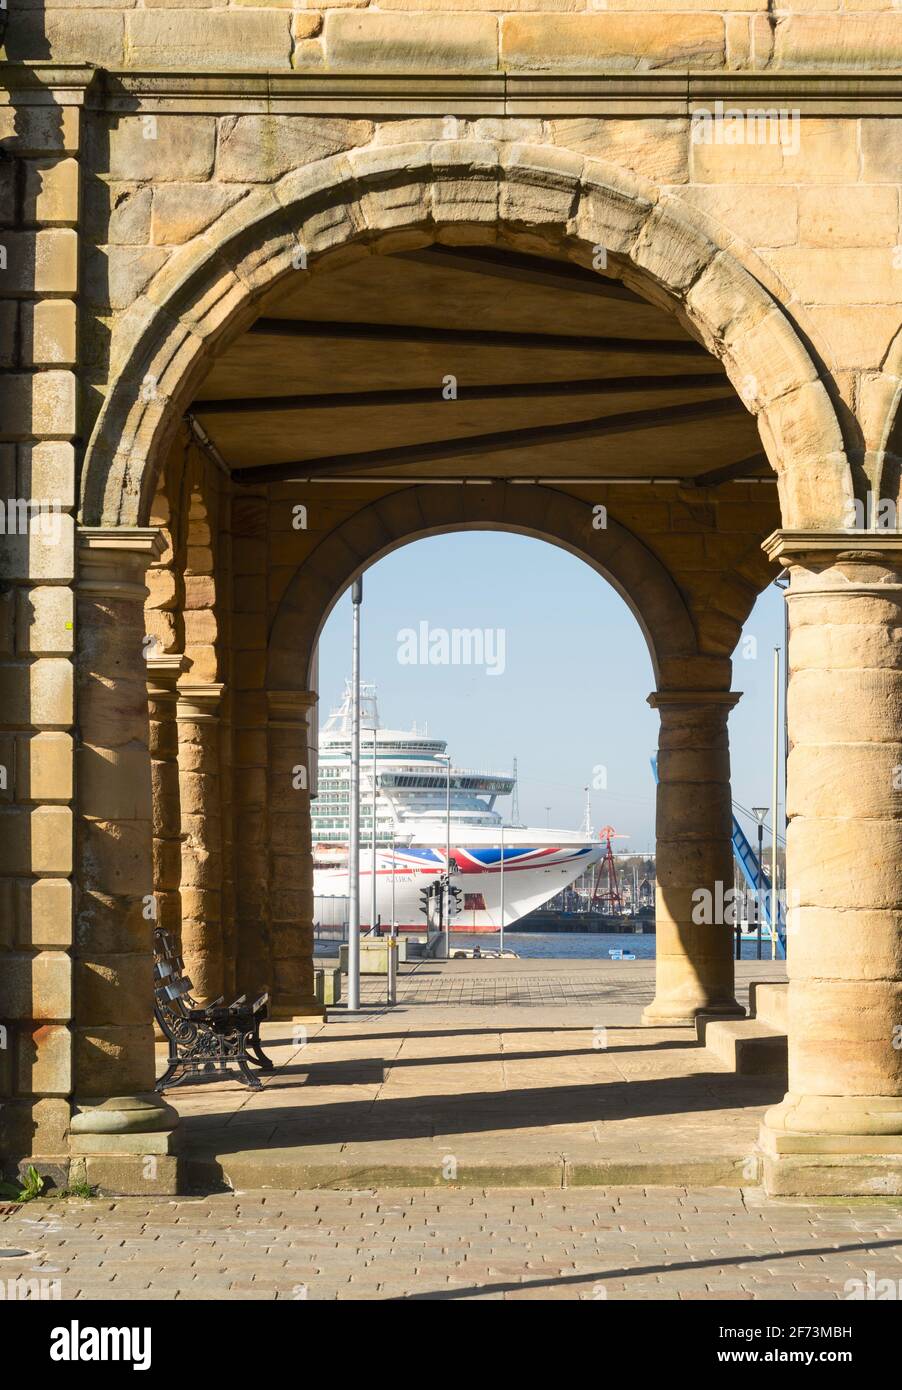 P&O Cruises cruise ship Azura berthed at North Shields on the river Tyne laid up during the Covid pandemic, north east England, UK Stock Photo